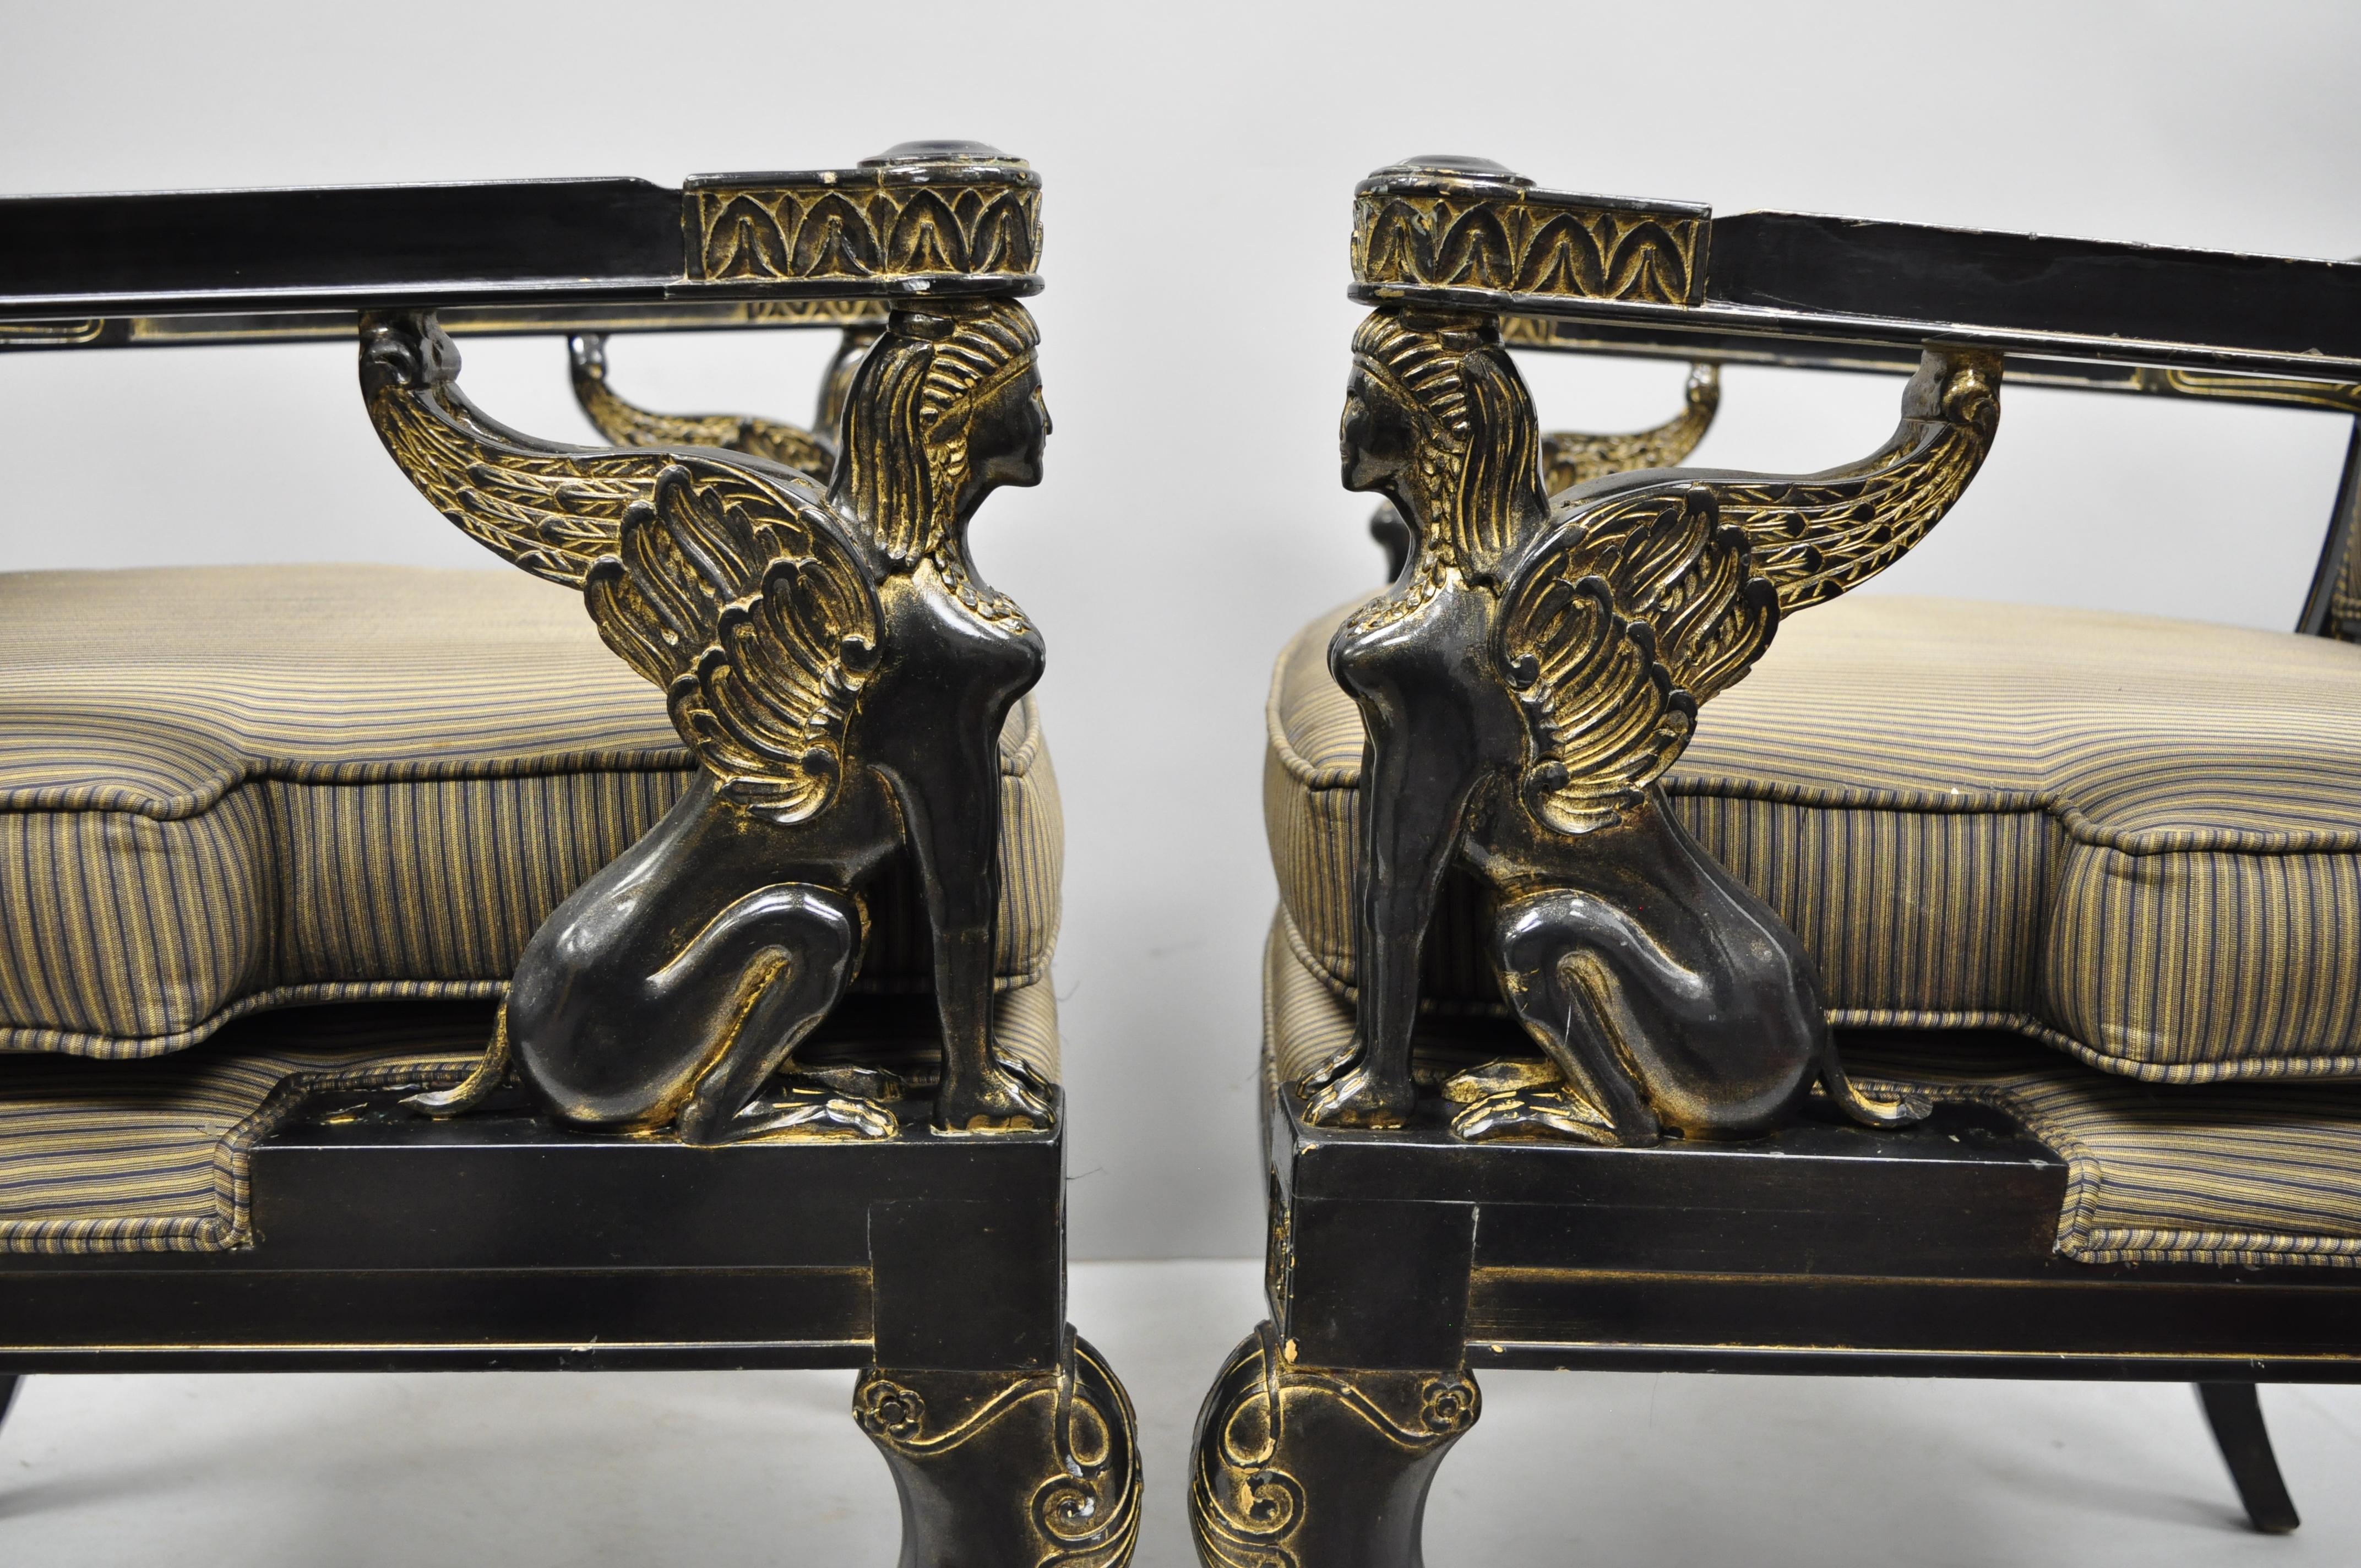 Fabric Pair of French Empire Regency Black Lacquer Chairs with Sphinx Figures, Lambert